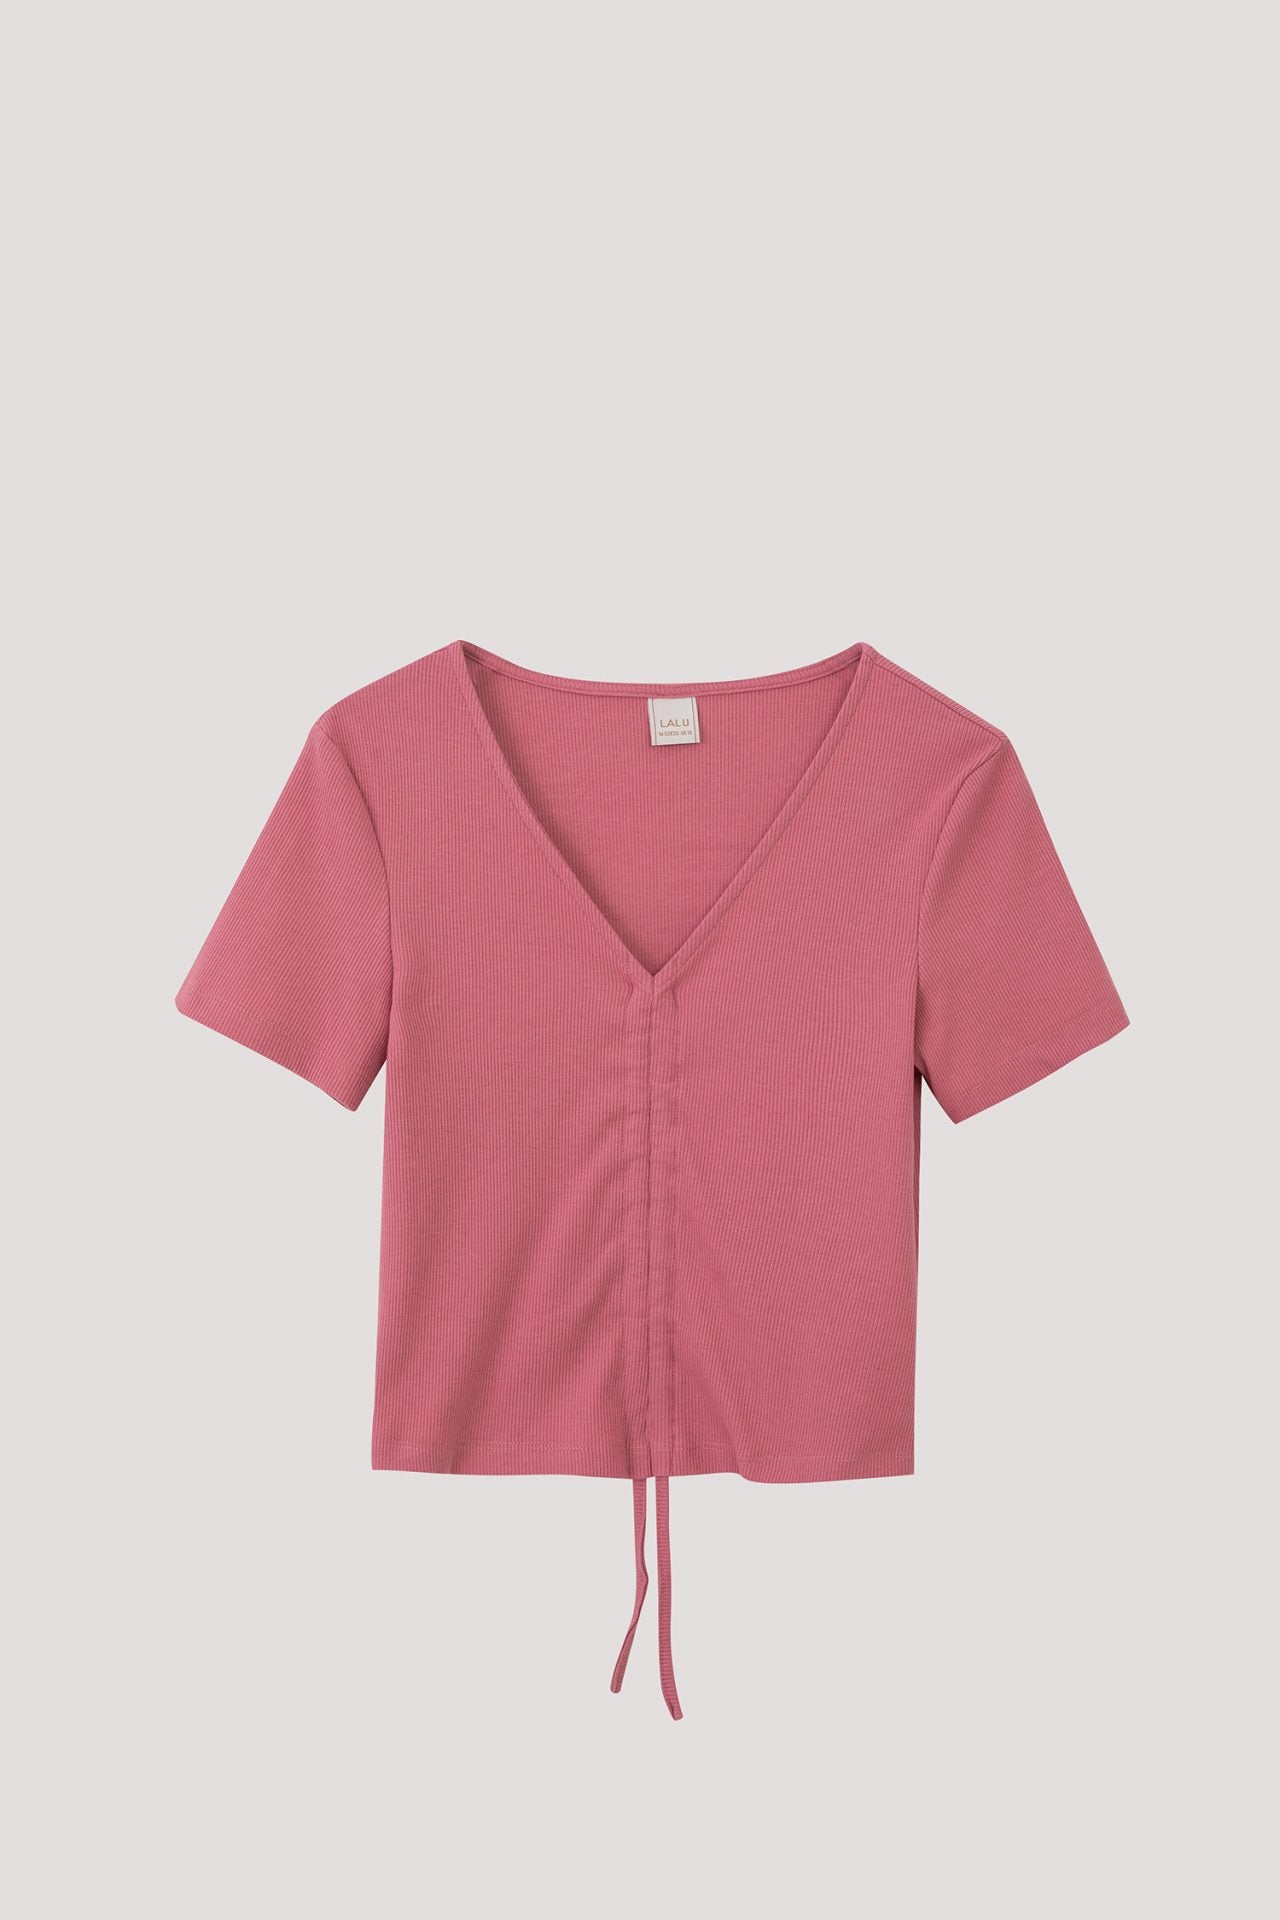 BT 9669 GATHERED DETAILS TIED BLOUSE PINK